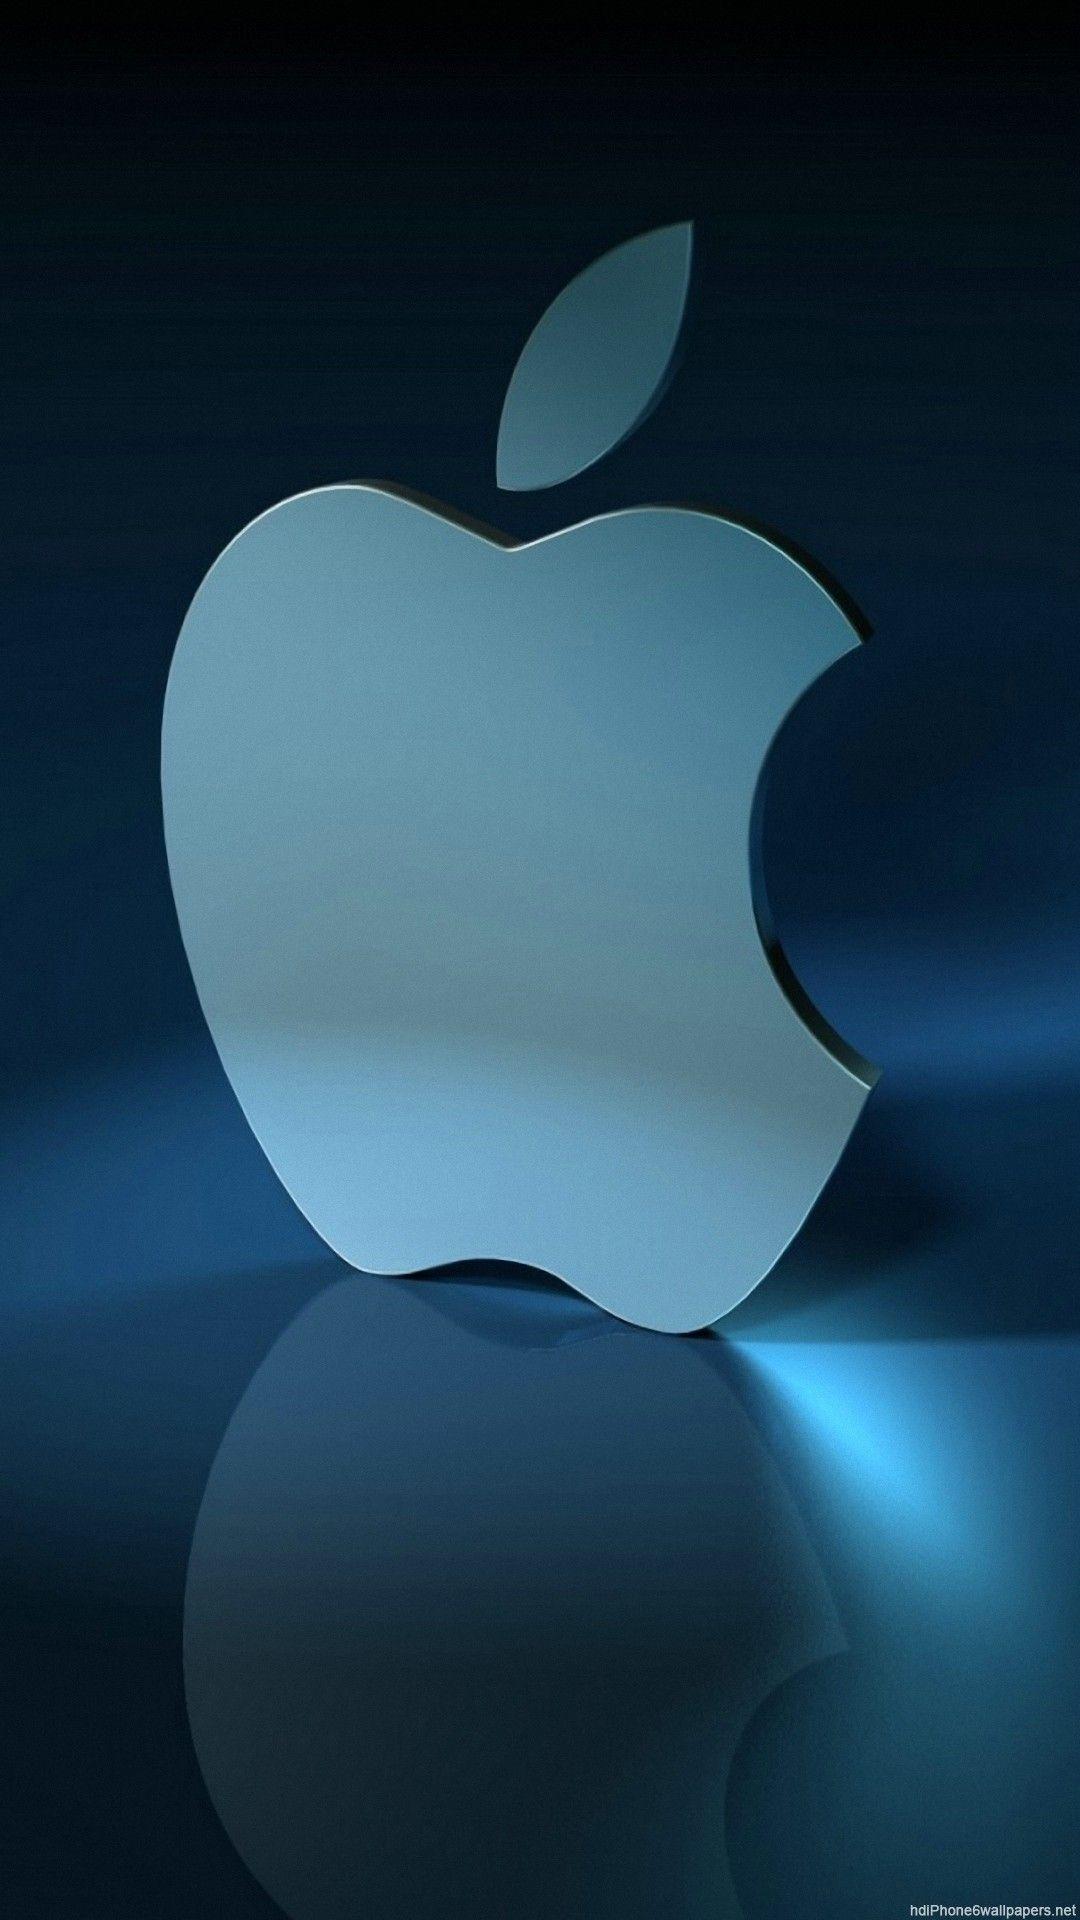 Apple Iphone 5s Wallpapers Top Free Apple Iphone 5s Backgrounds Wallpaperaccess